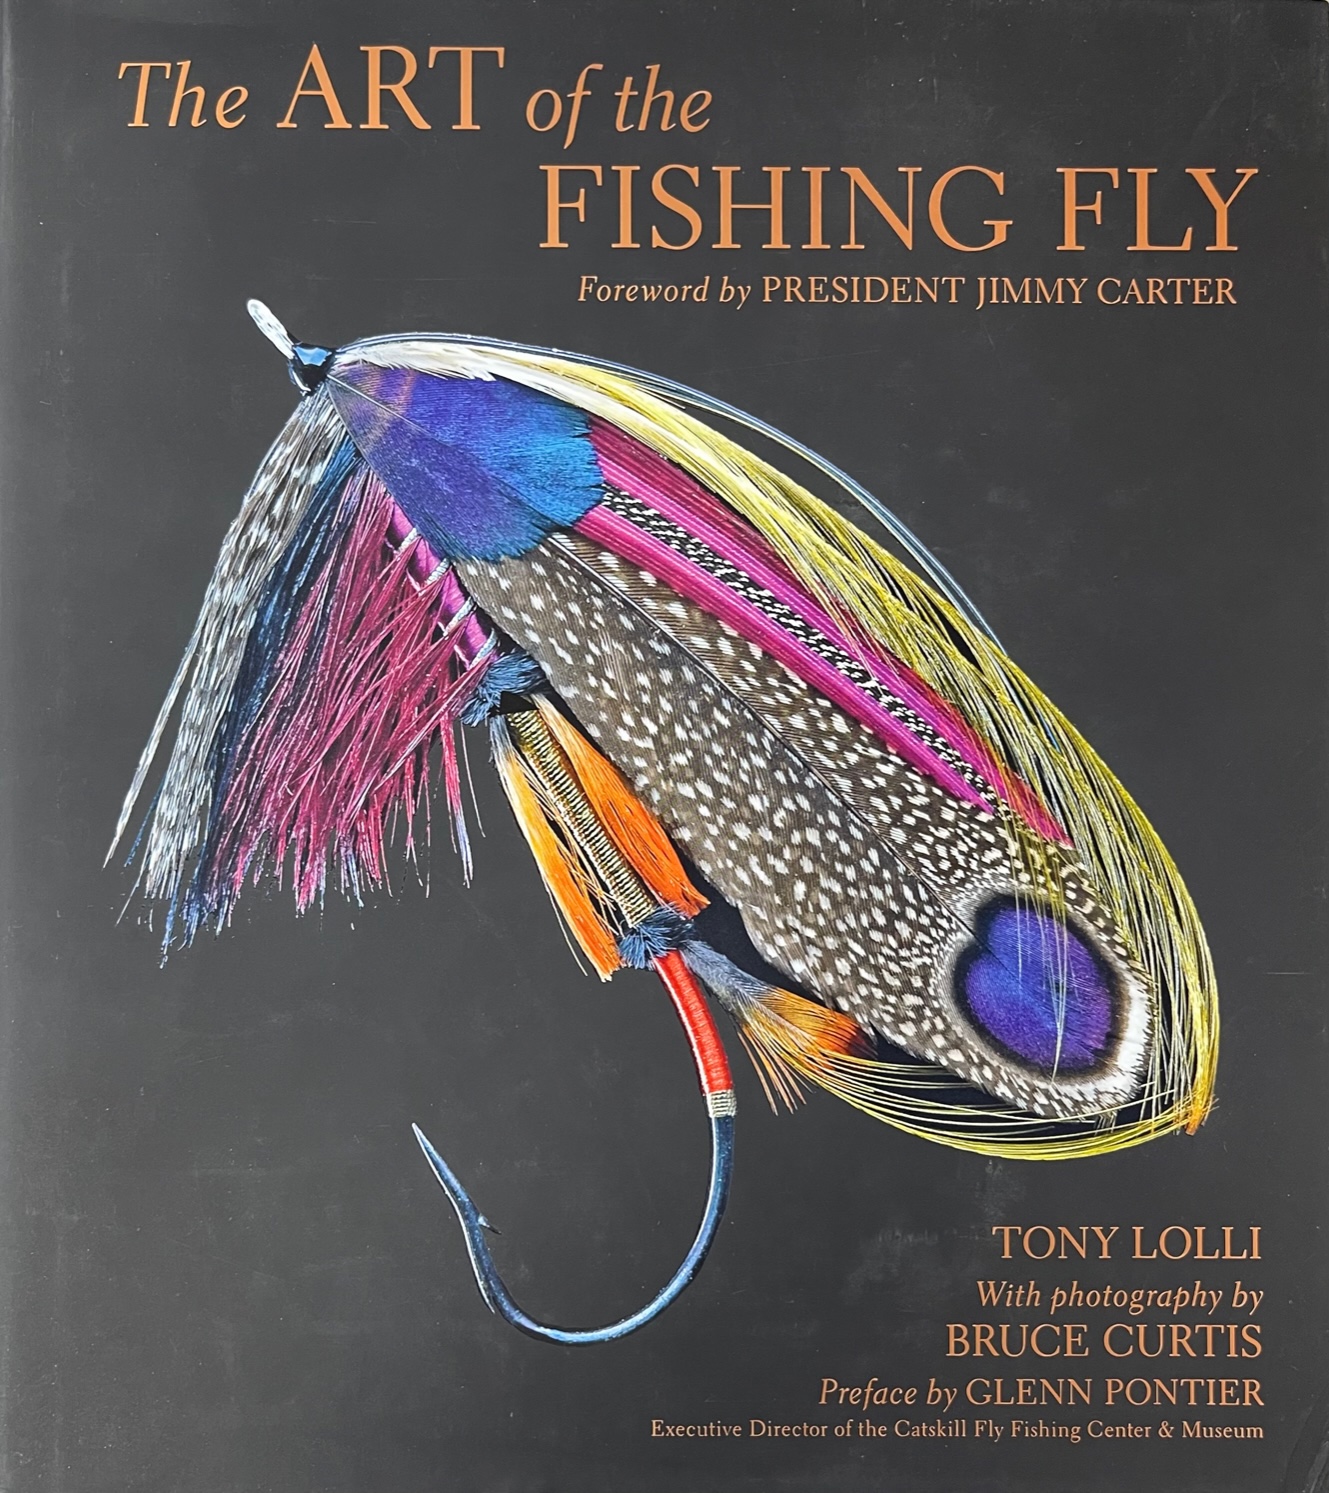 The ART of the FISHING FLY - by Tony Lolli